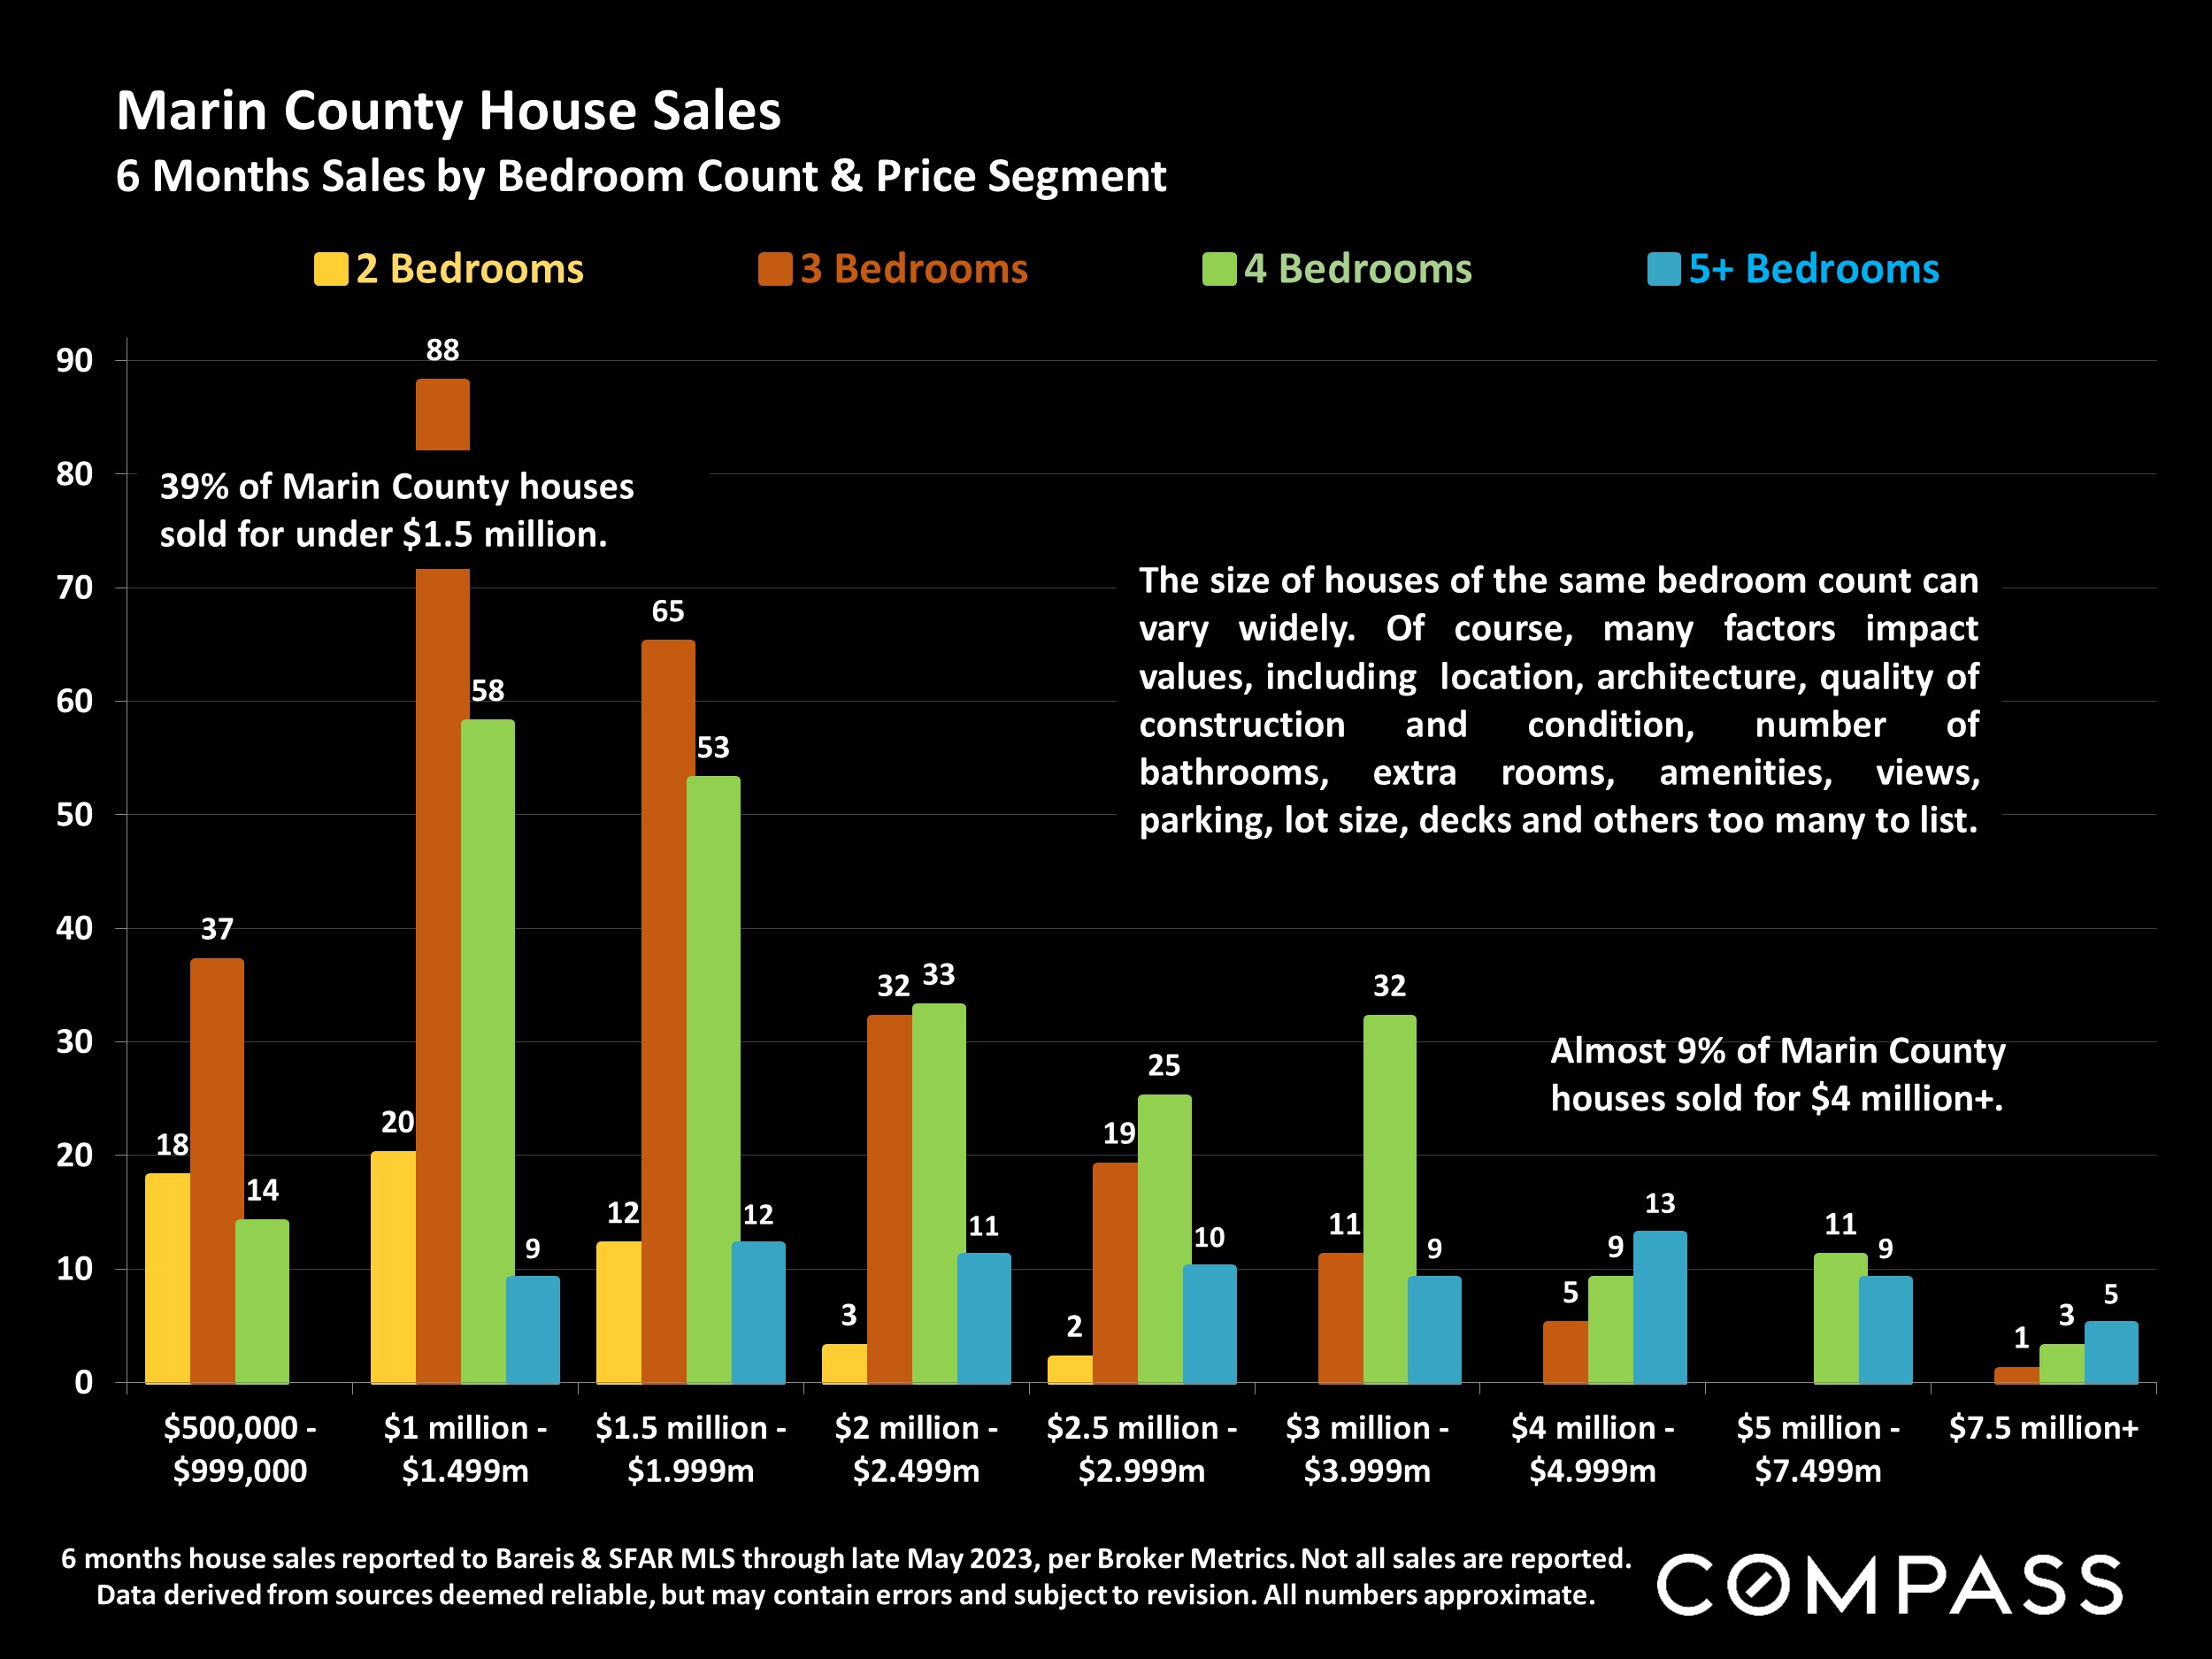 Marin County House Sales